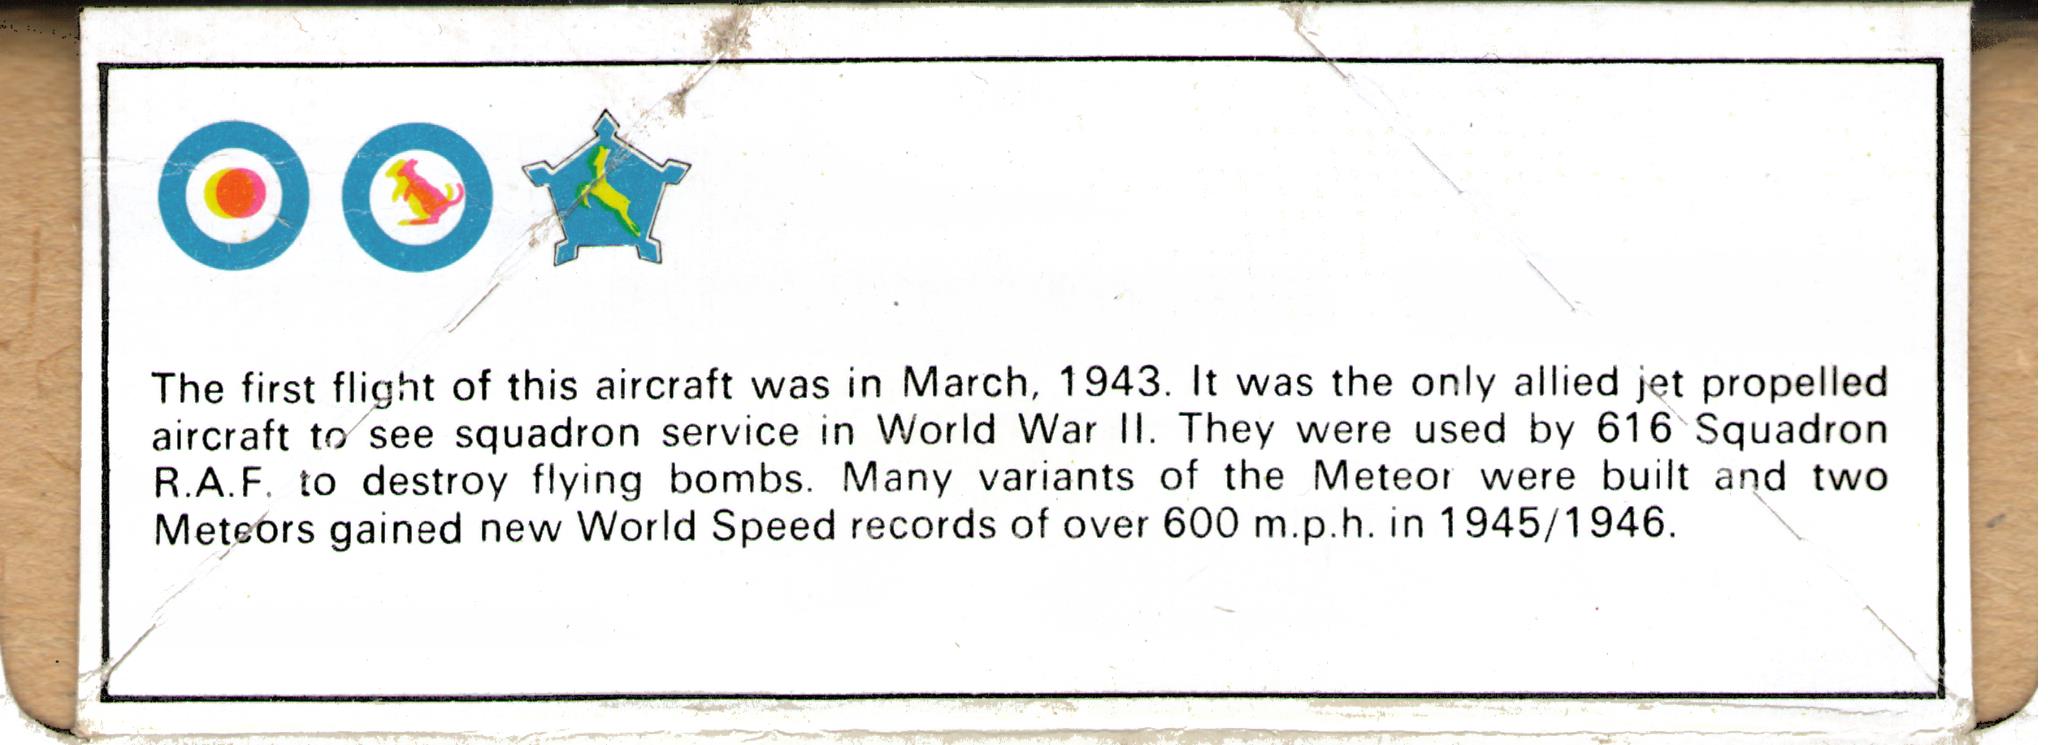 FROG F200 Gloster Meteor F.Mk.IV Interceptor fighter, 1970, multilingual short history of the Meteor fighter on the side of the box's base